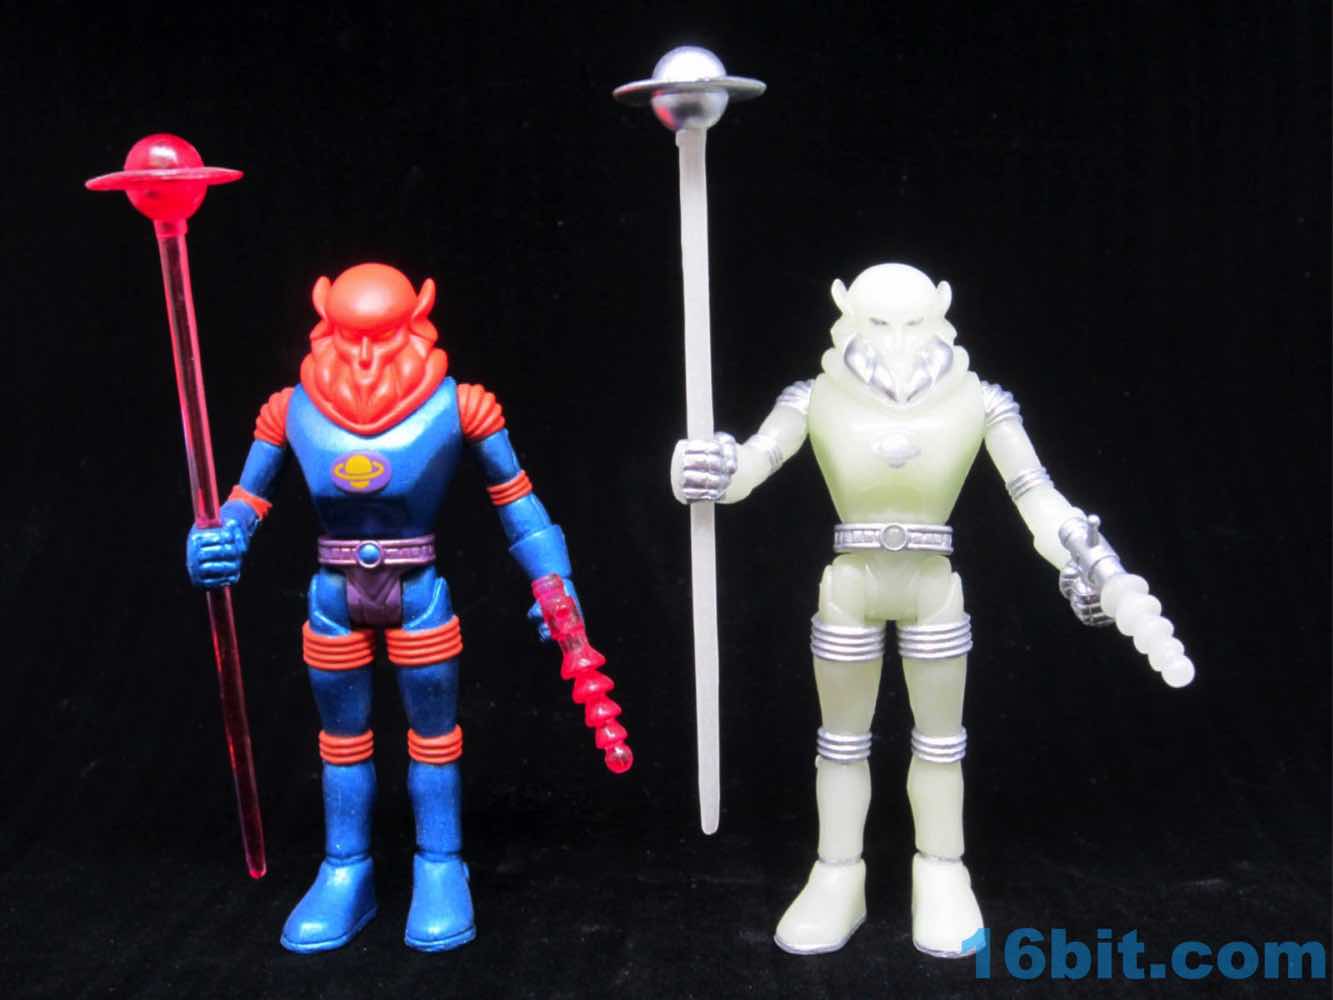 COLORFORMS OUTER SPACE MEN NEW 2017 ELECTRON COSMIC RADIATION GLOWS IN THE DARK 